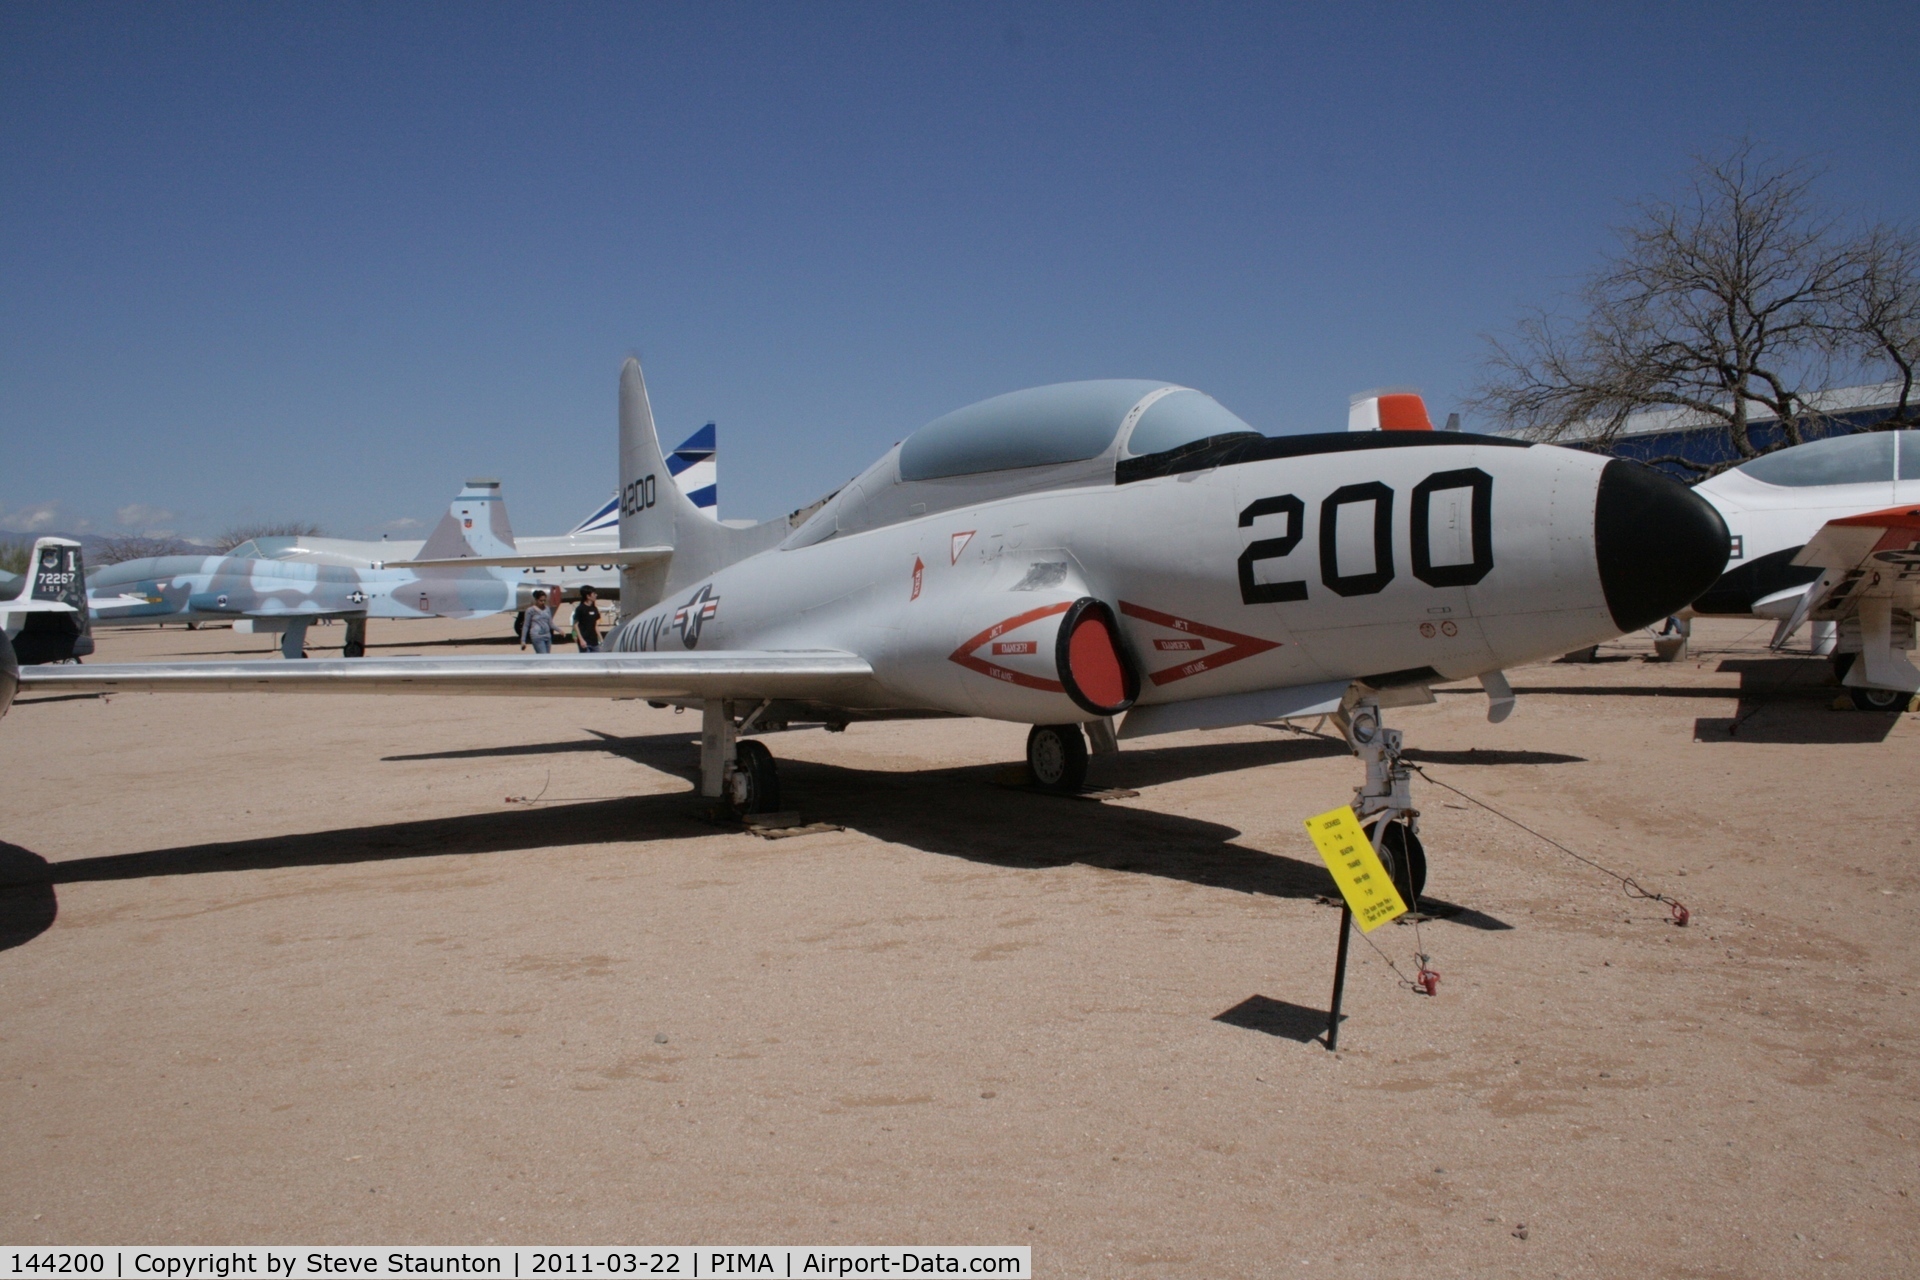 144200, 1957 Lockheed T-1A Seastar C/N 1080-1104, Taken at Pima Air and Space Museum, in March 2011 whilst on an Aeroprint Aviation tour